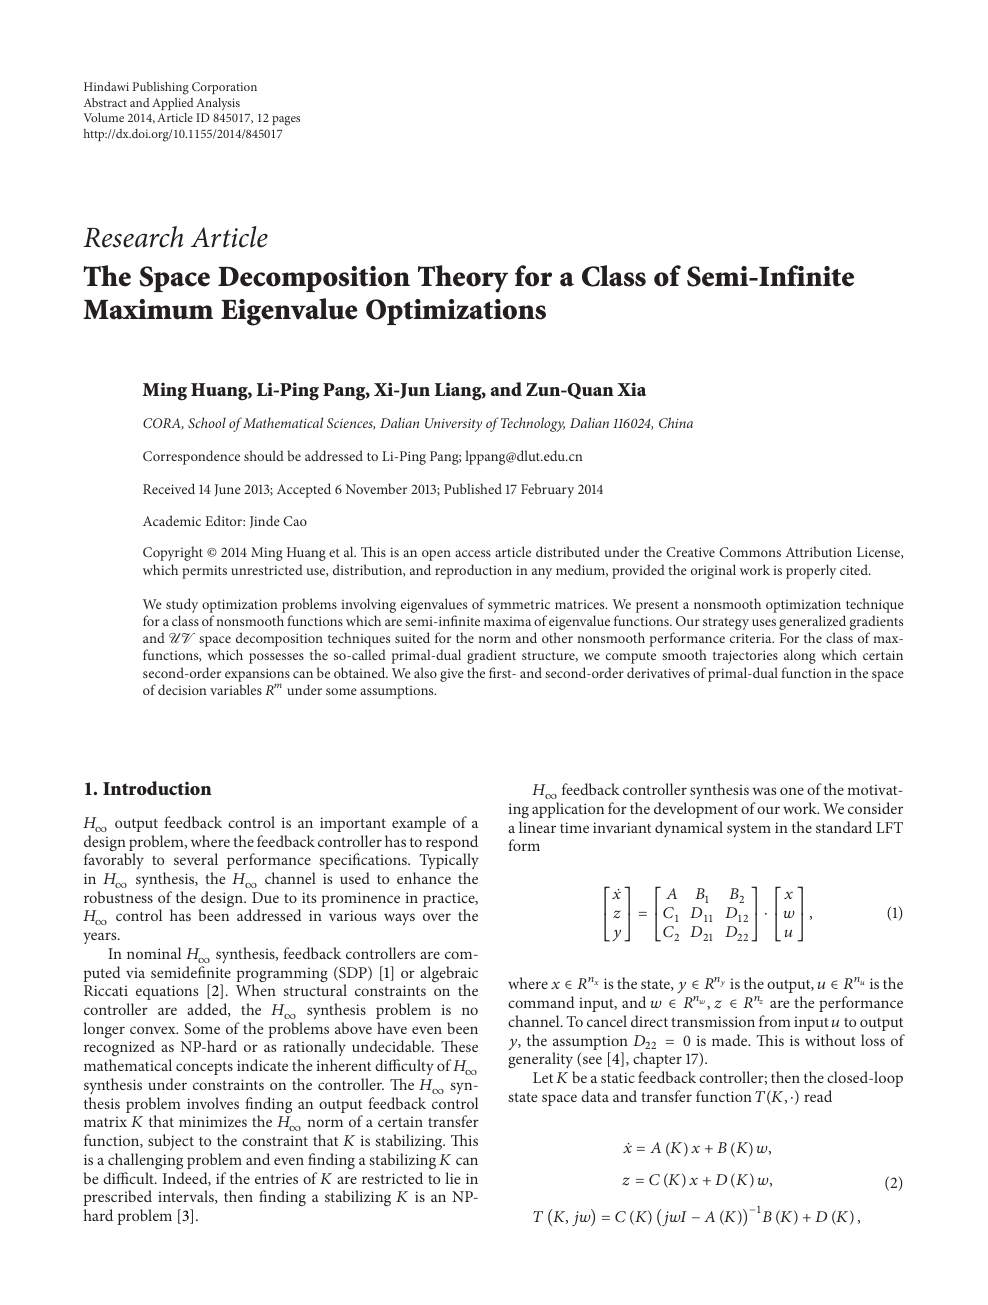 The Space Decomposition Theory For A Class Of Semi Infinite Maximum Eigenvalue Optimizations Topic Of Research Paper In Mathematics Download Scholarly Article Pdf And Read For Free On Cyberleninka Open Science Hub